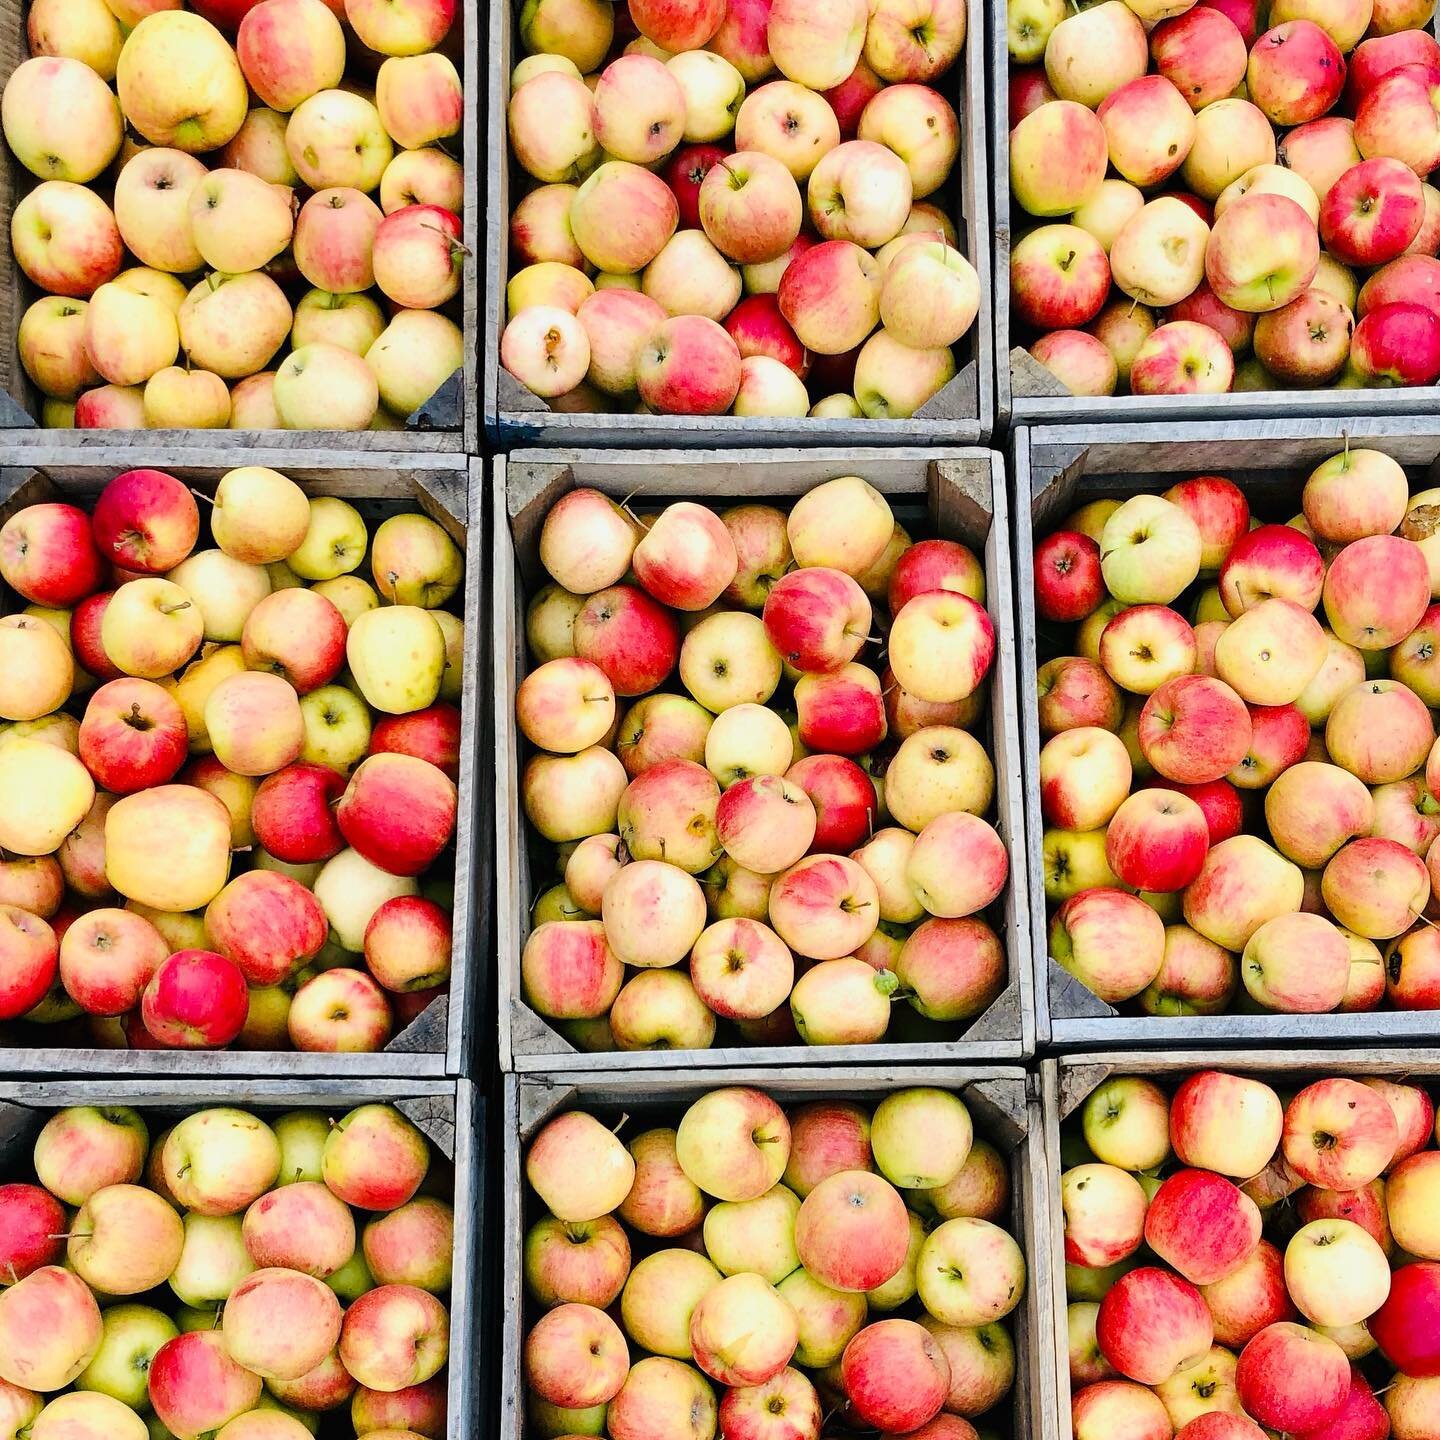 It&rsquo;s peak Apple season at the Castile Cider Mill! Varieties include: Cortland, Mac, 20 oz, Honeycrisp, Snapdragon, Macoun, Northern Spy, Jonagold, Crispin, Golden Delicious, Red Delicious, and Granny Smith. Stop in while we still have your favo